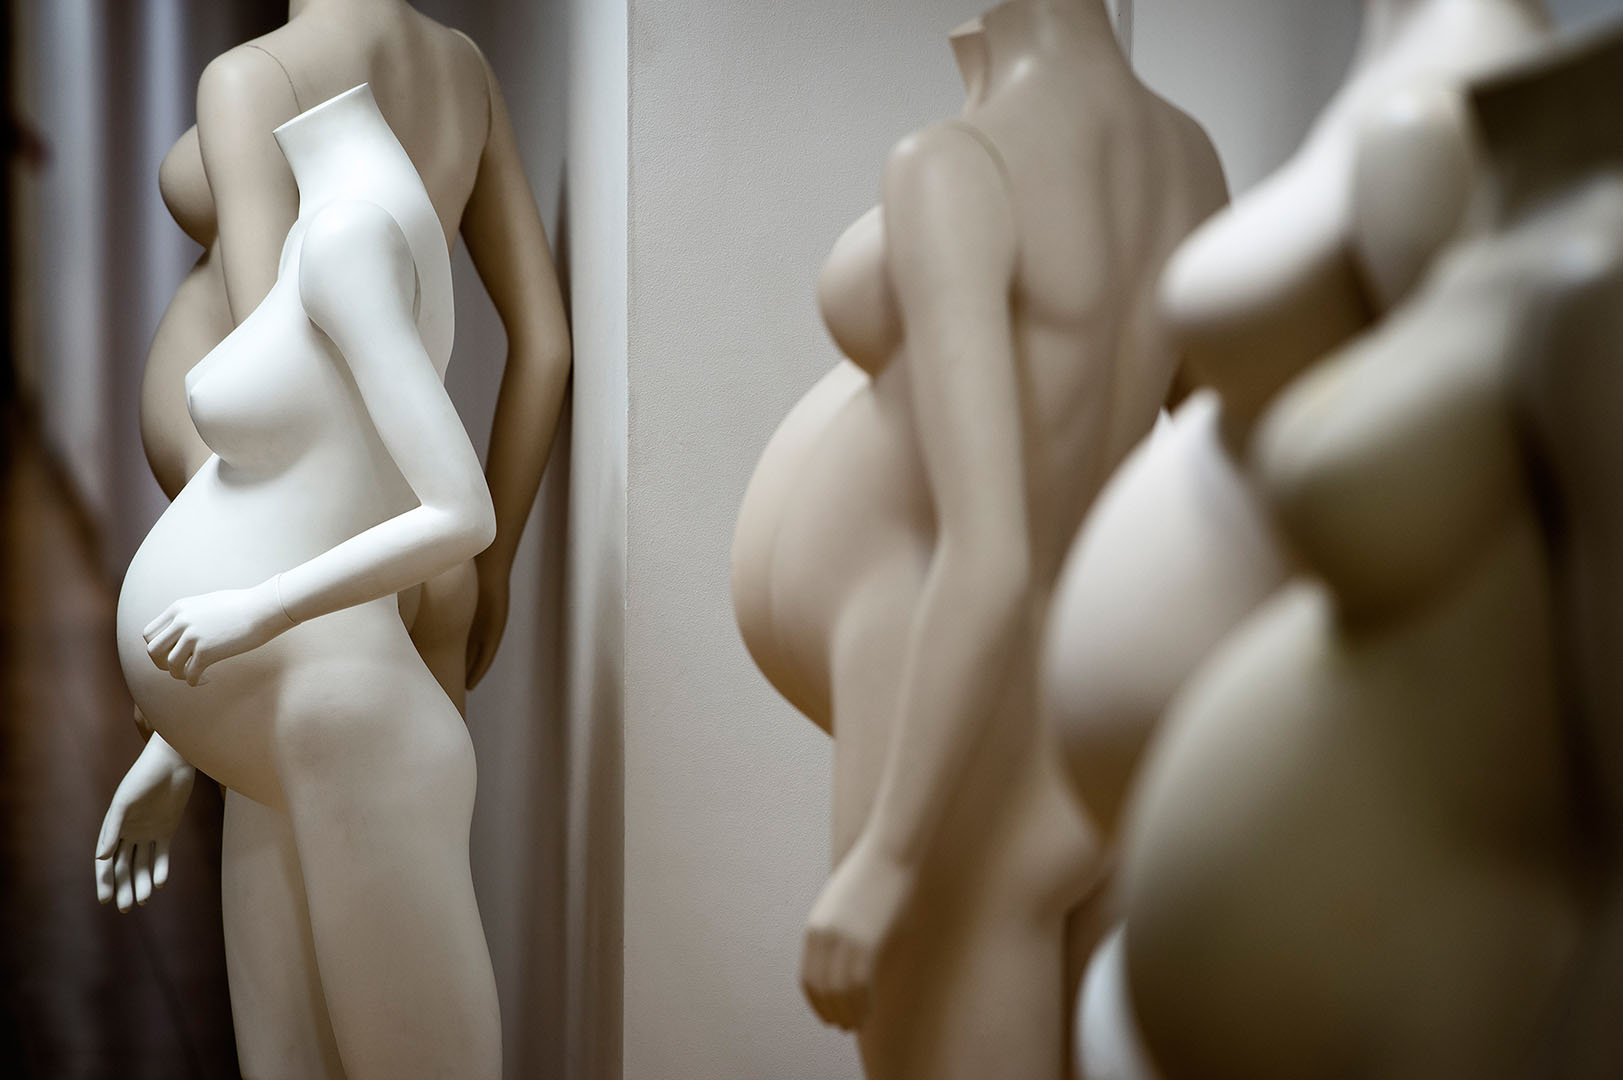 Undressed maternity mannequins waiting to be chosen